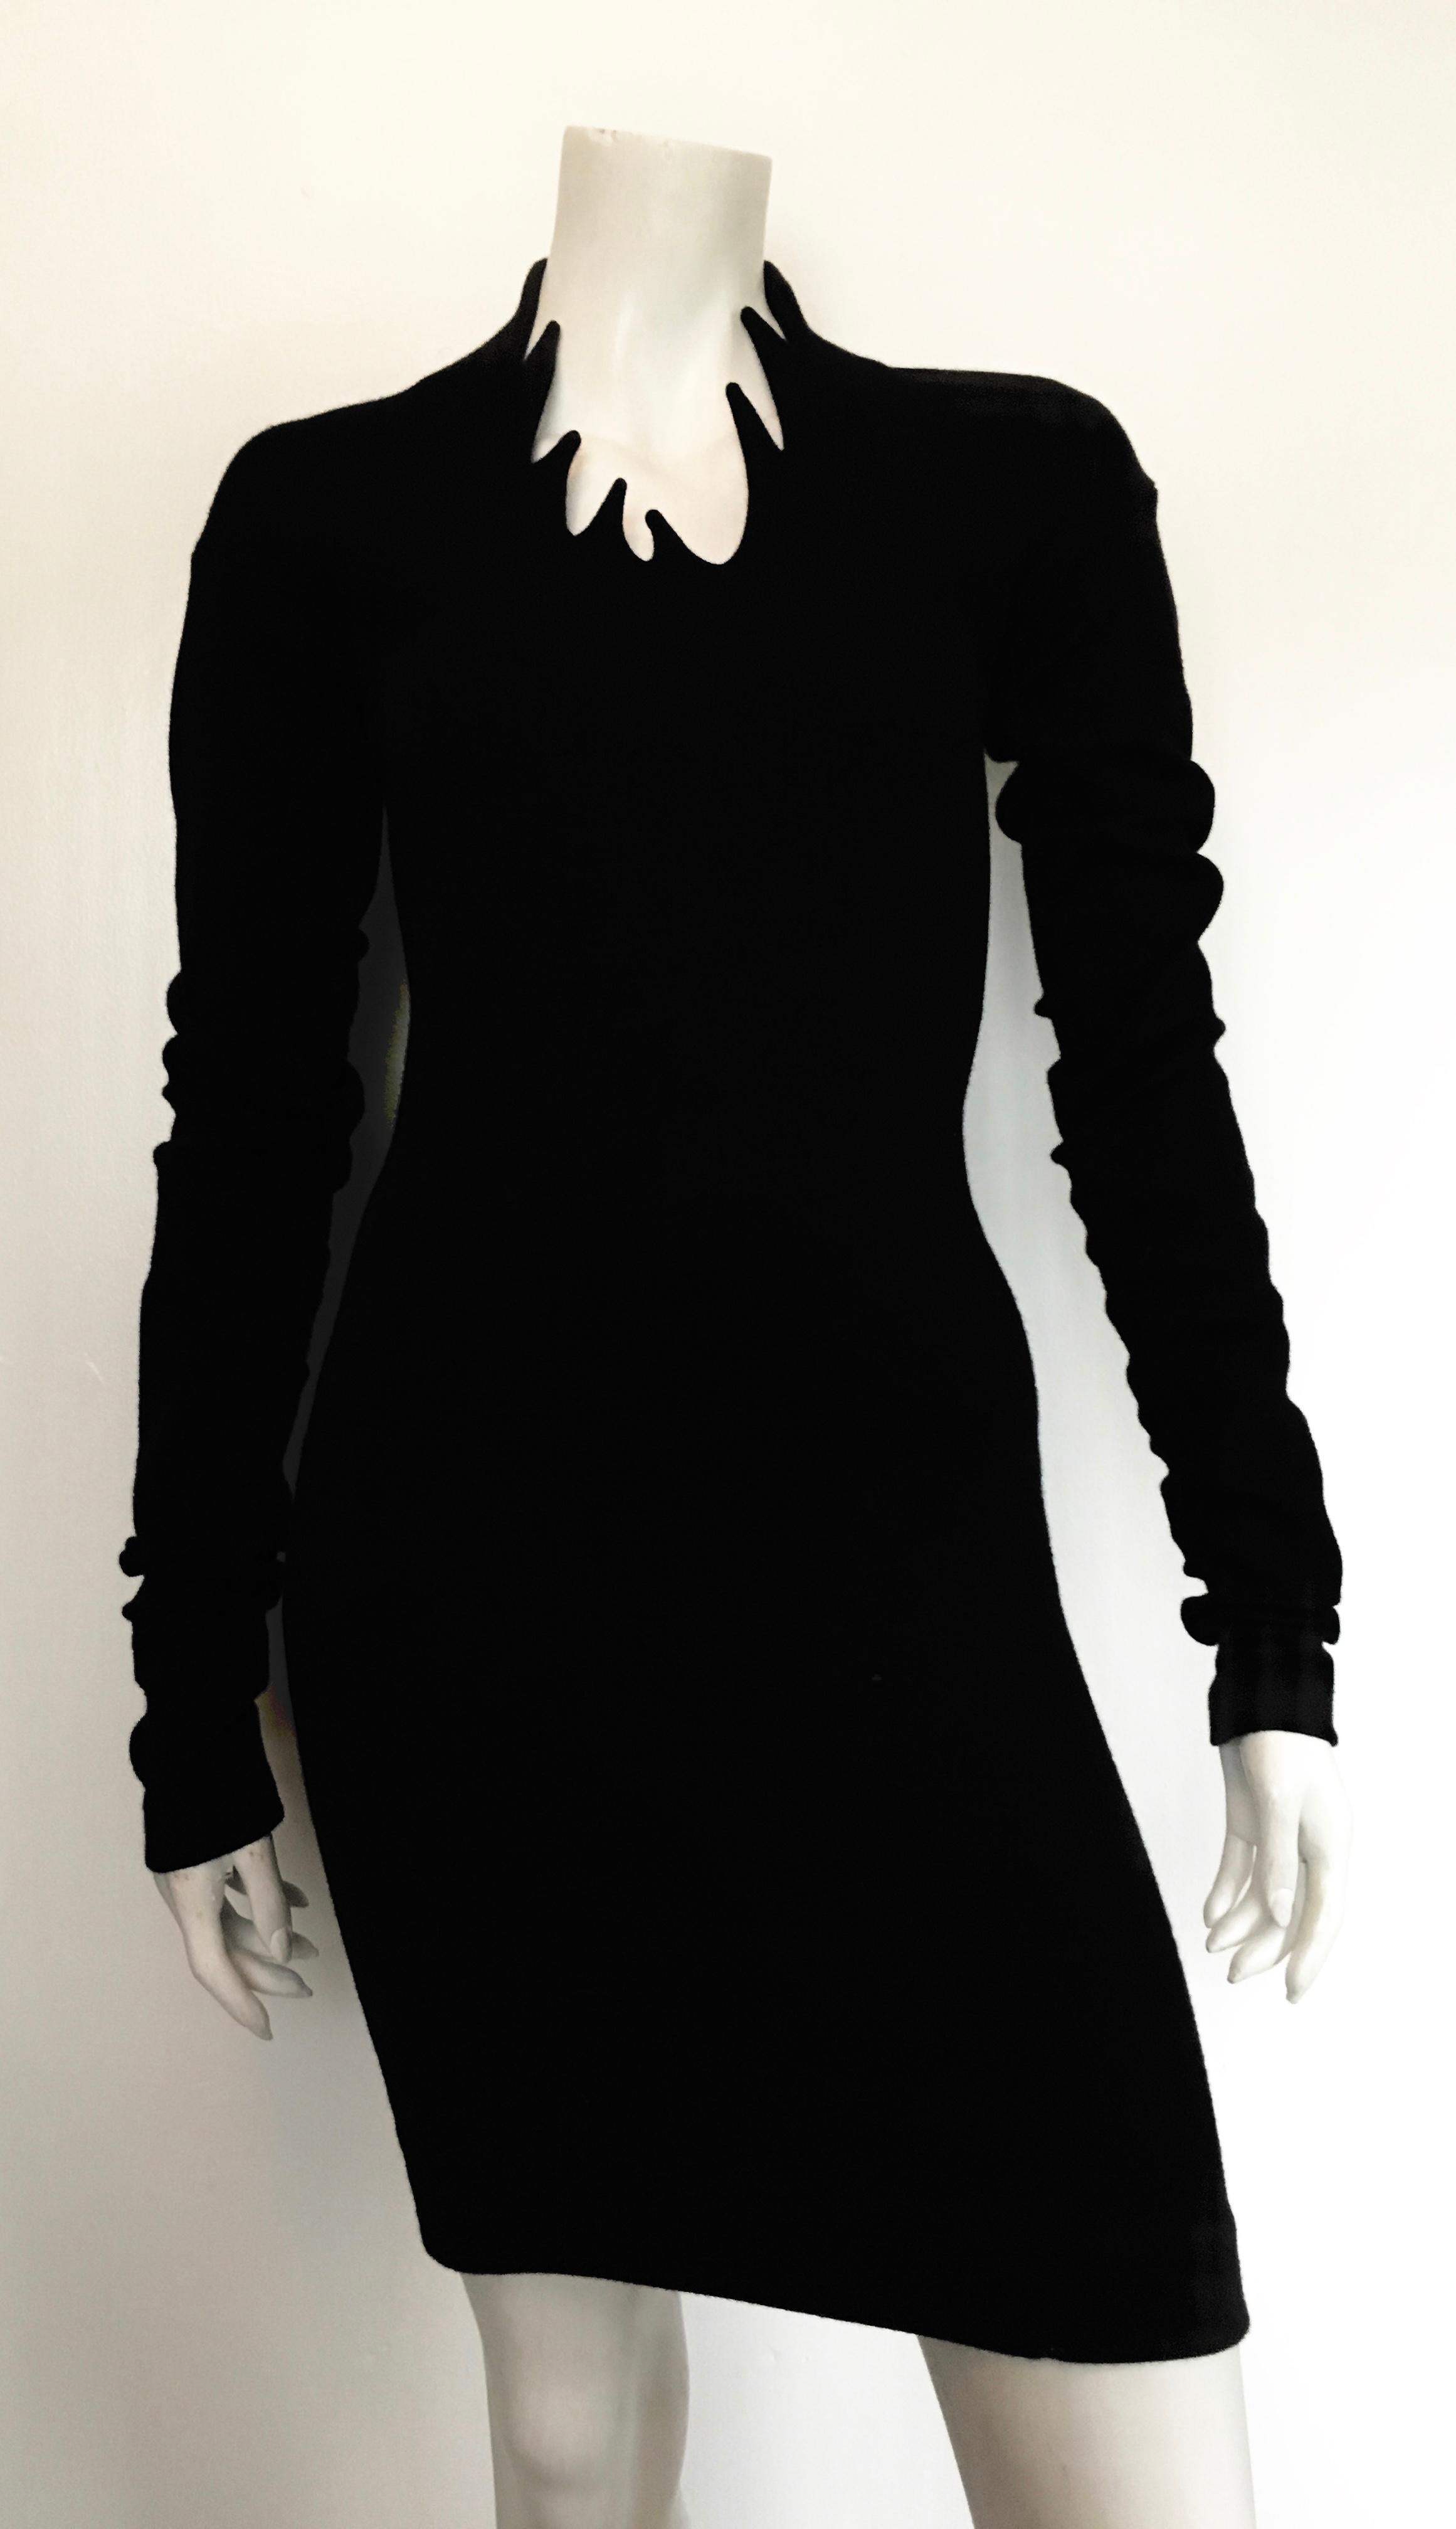 Romeo Gigli 1990 black wool long sleeve sexy dress with dramatic collar is an Italian size 40 and an US size 4.  This striking spectacular dress is jaw dropping. Sleeves can be tucked or rolled but I like the dramatic effect of just letting them